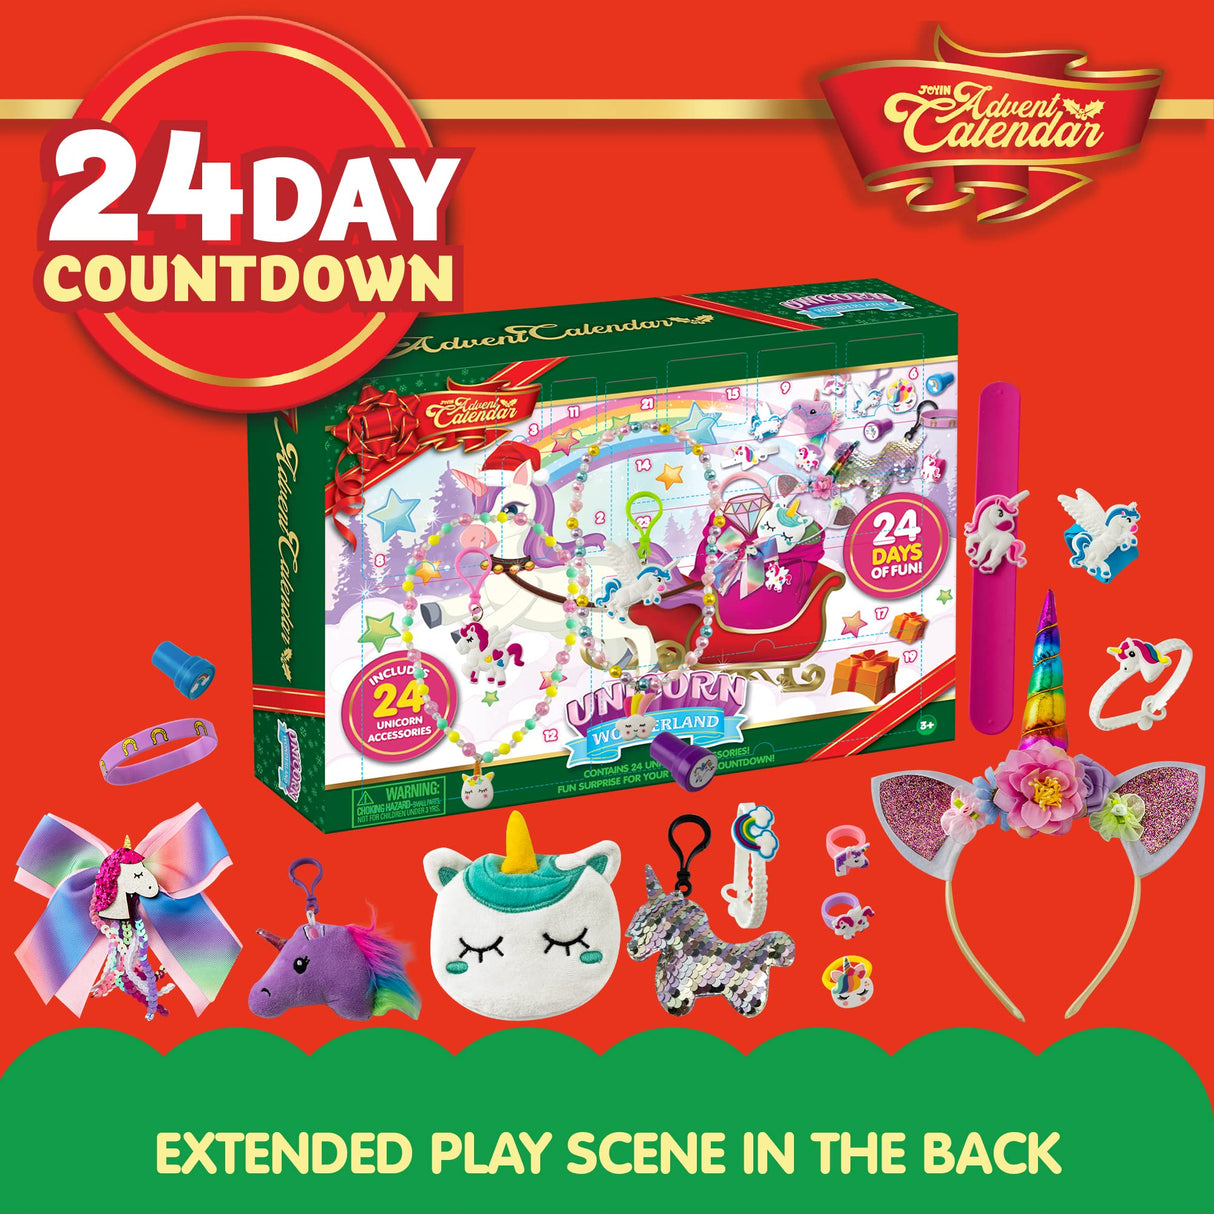 JOYIN 2023 Advent Calendar Christmas 24 Days Countdown Advent Calendar with 47 Unicorn Accessories Including Unicorn Jewelry, Necklace, Bracelets, Headband Stickers, Stamps and Rings for Kids Christmas Party Favor Gifts